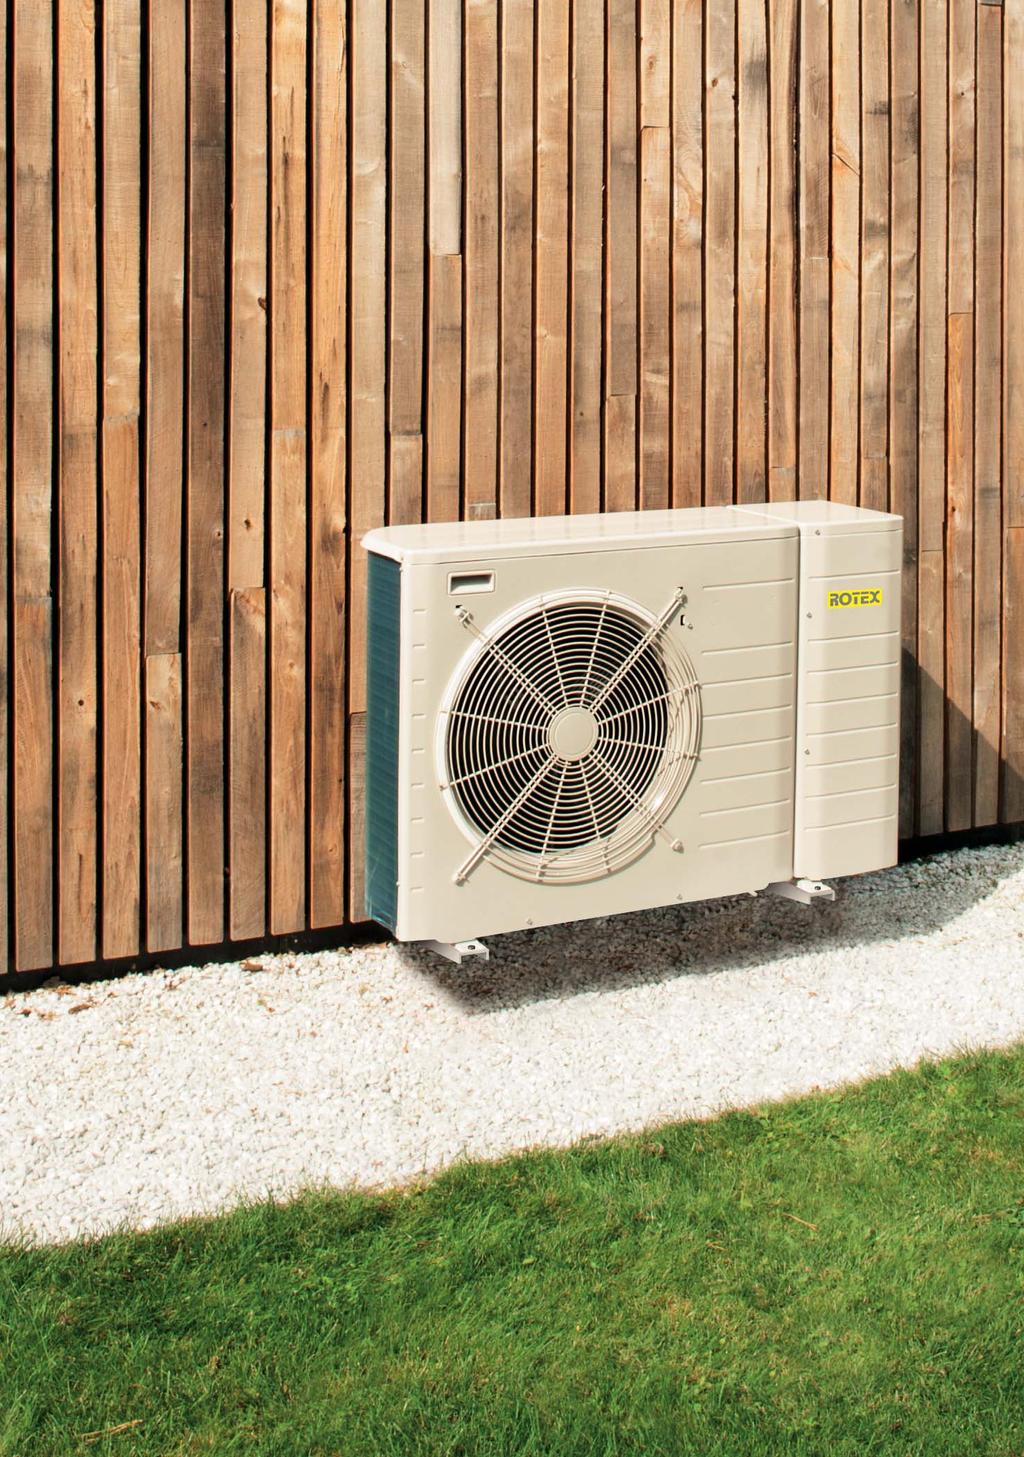 Flexible application and easy installation * ROTEX monobloc - all-in-one The ROTEX HPSU monobloc air-to-water heat pump for outdoor installation combines all components in a single compact unit.